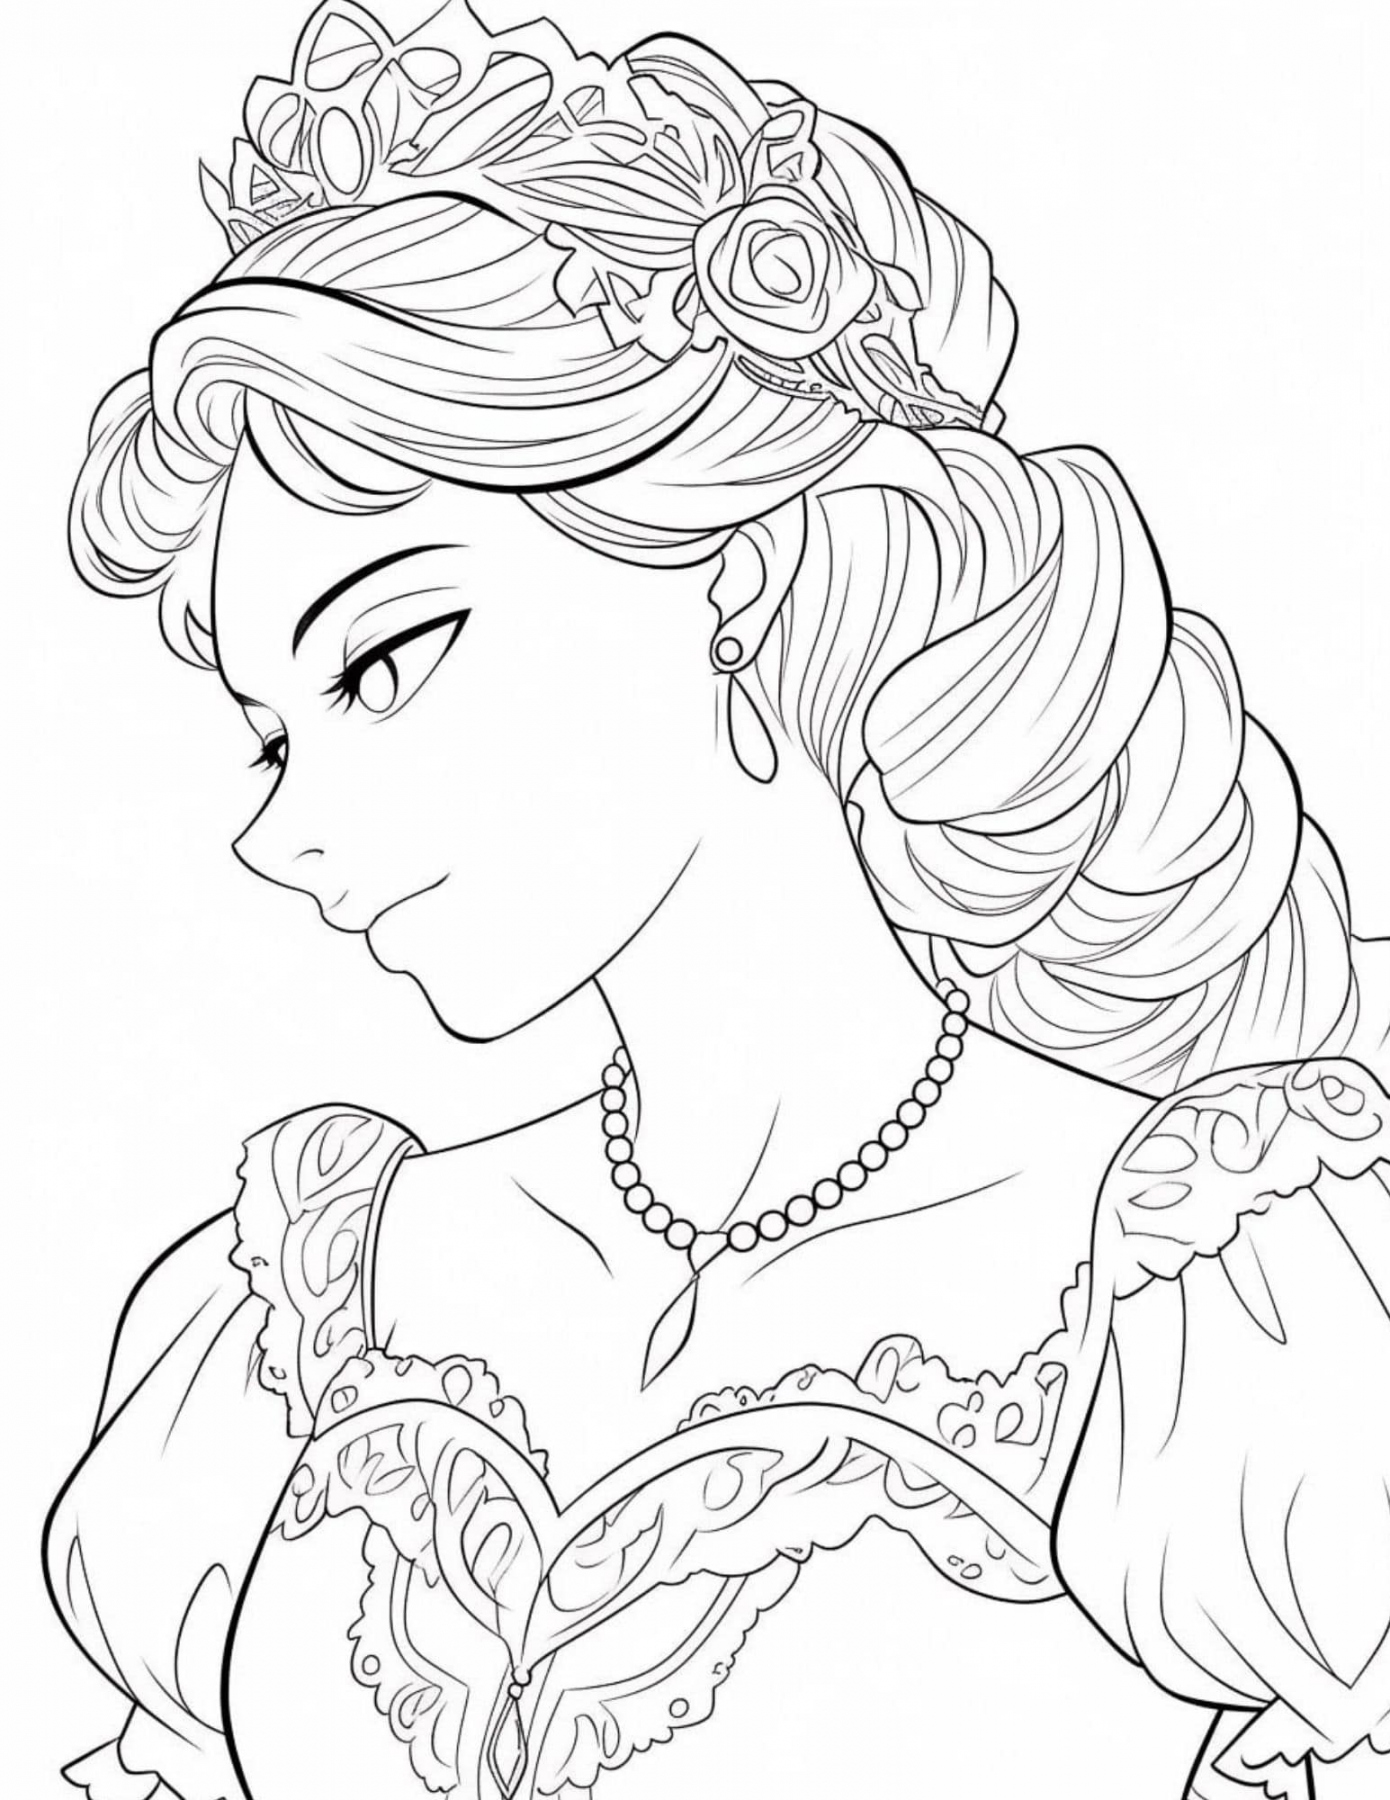 Free Printable Princess Coloring Pages - Printable -  Gorgeous Princess Coloring Pages For Kids And Adults